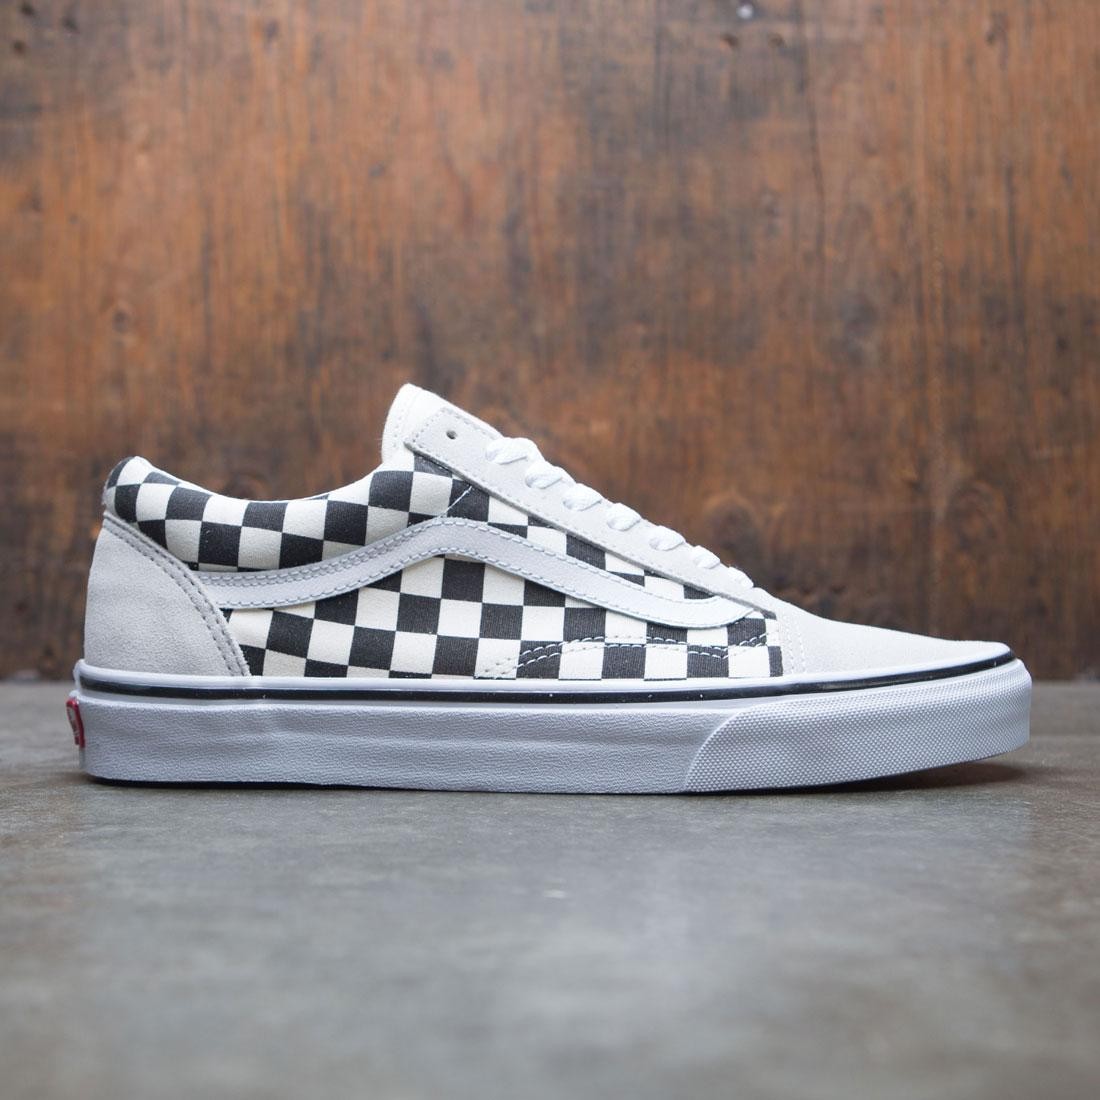 checkerboard black and white vans